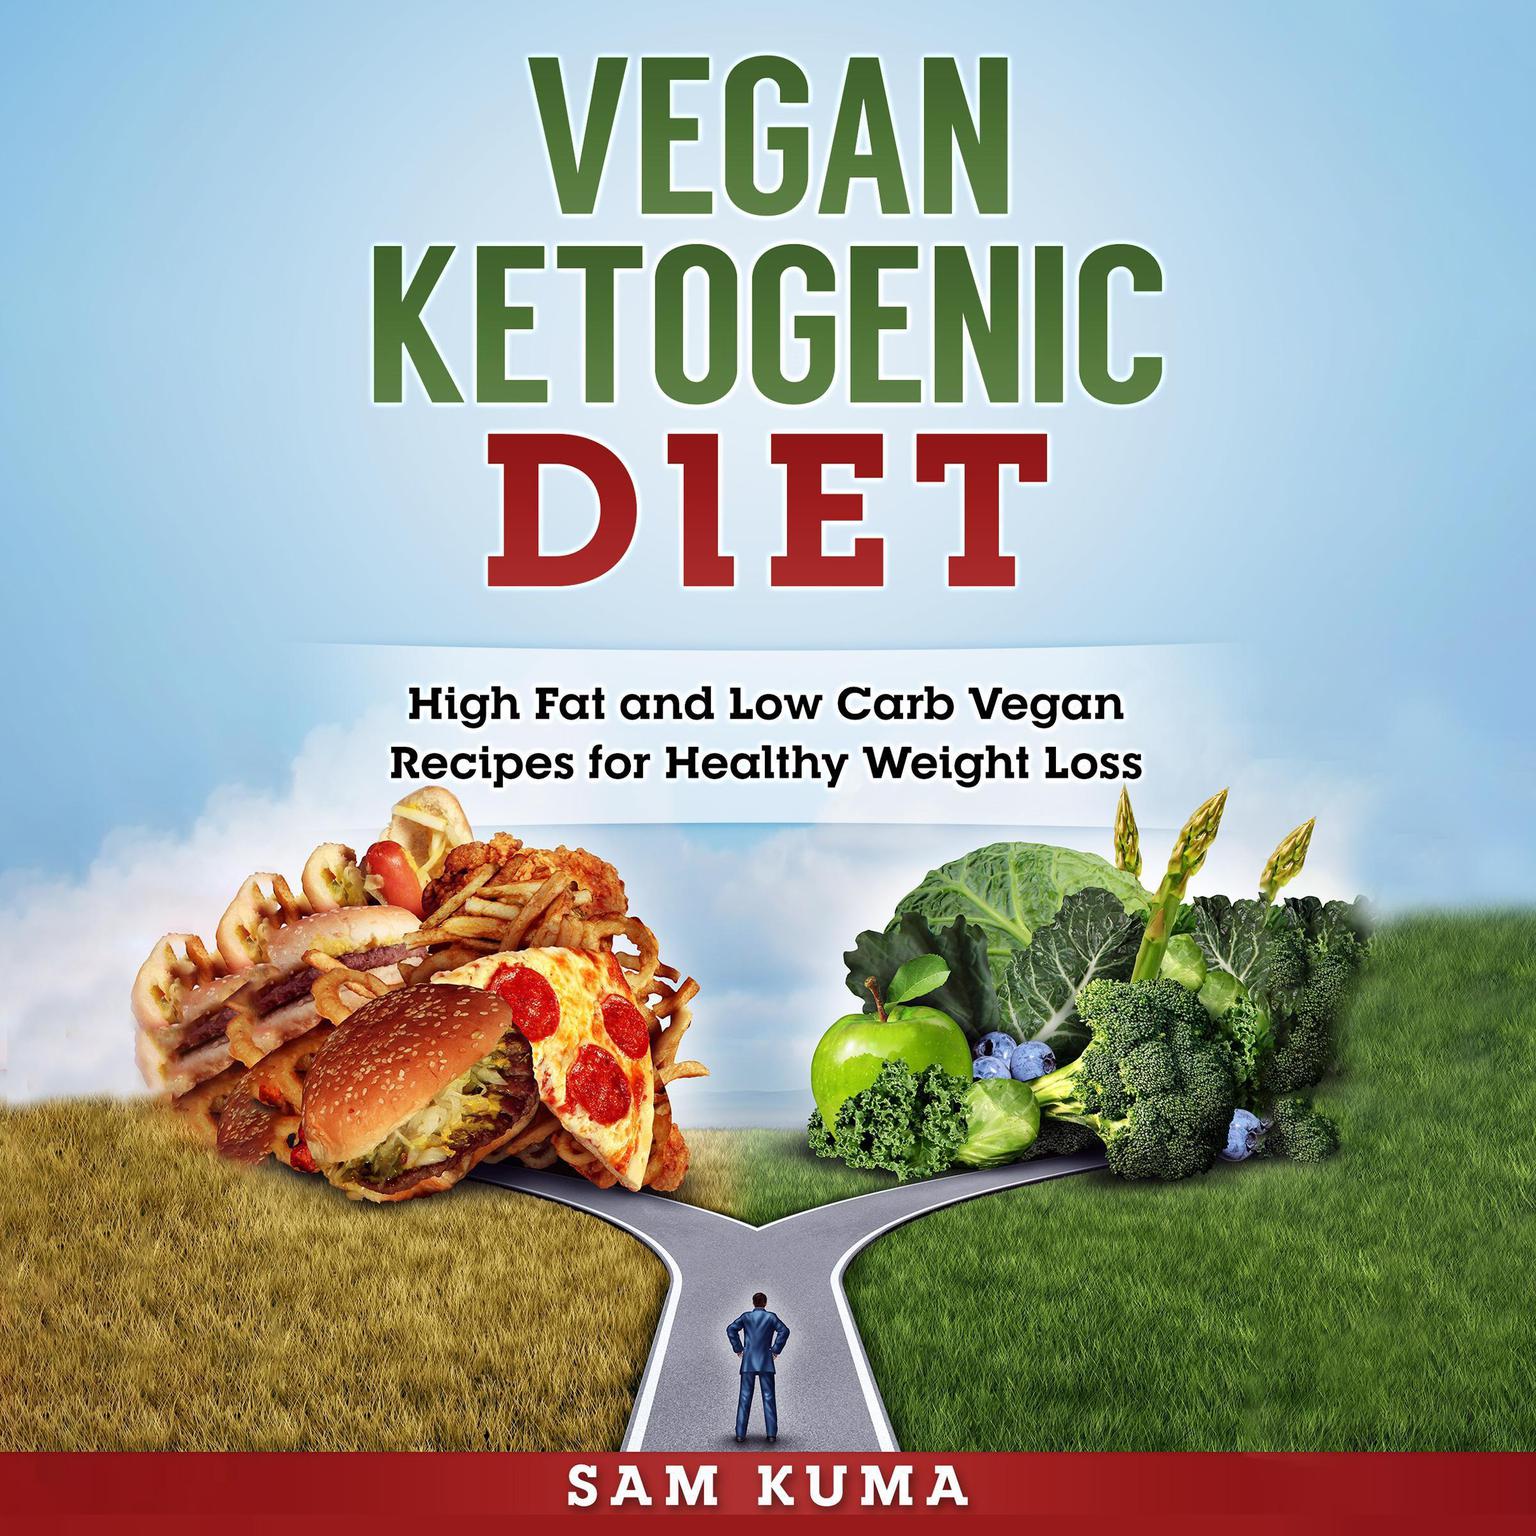 Vegan Ketogenic Diet: High Fat and Low Carb Vegan Recipes for Healthy Weight Loss Audiobook, by Sam Kuma